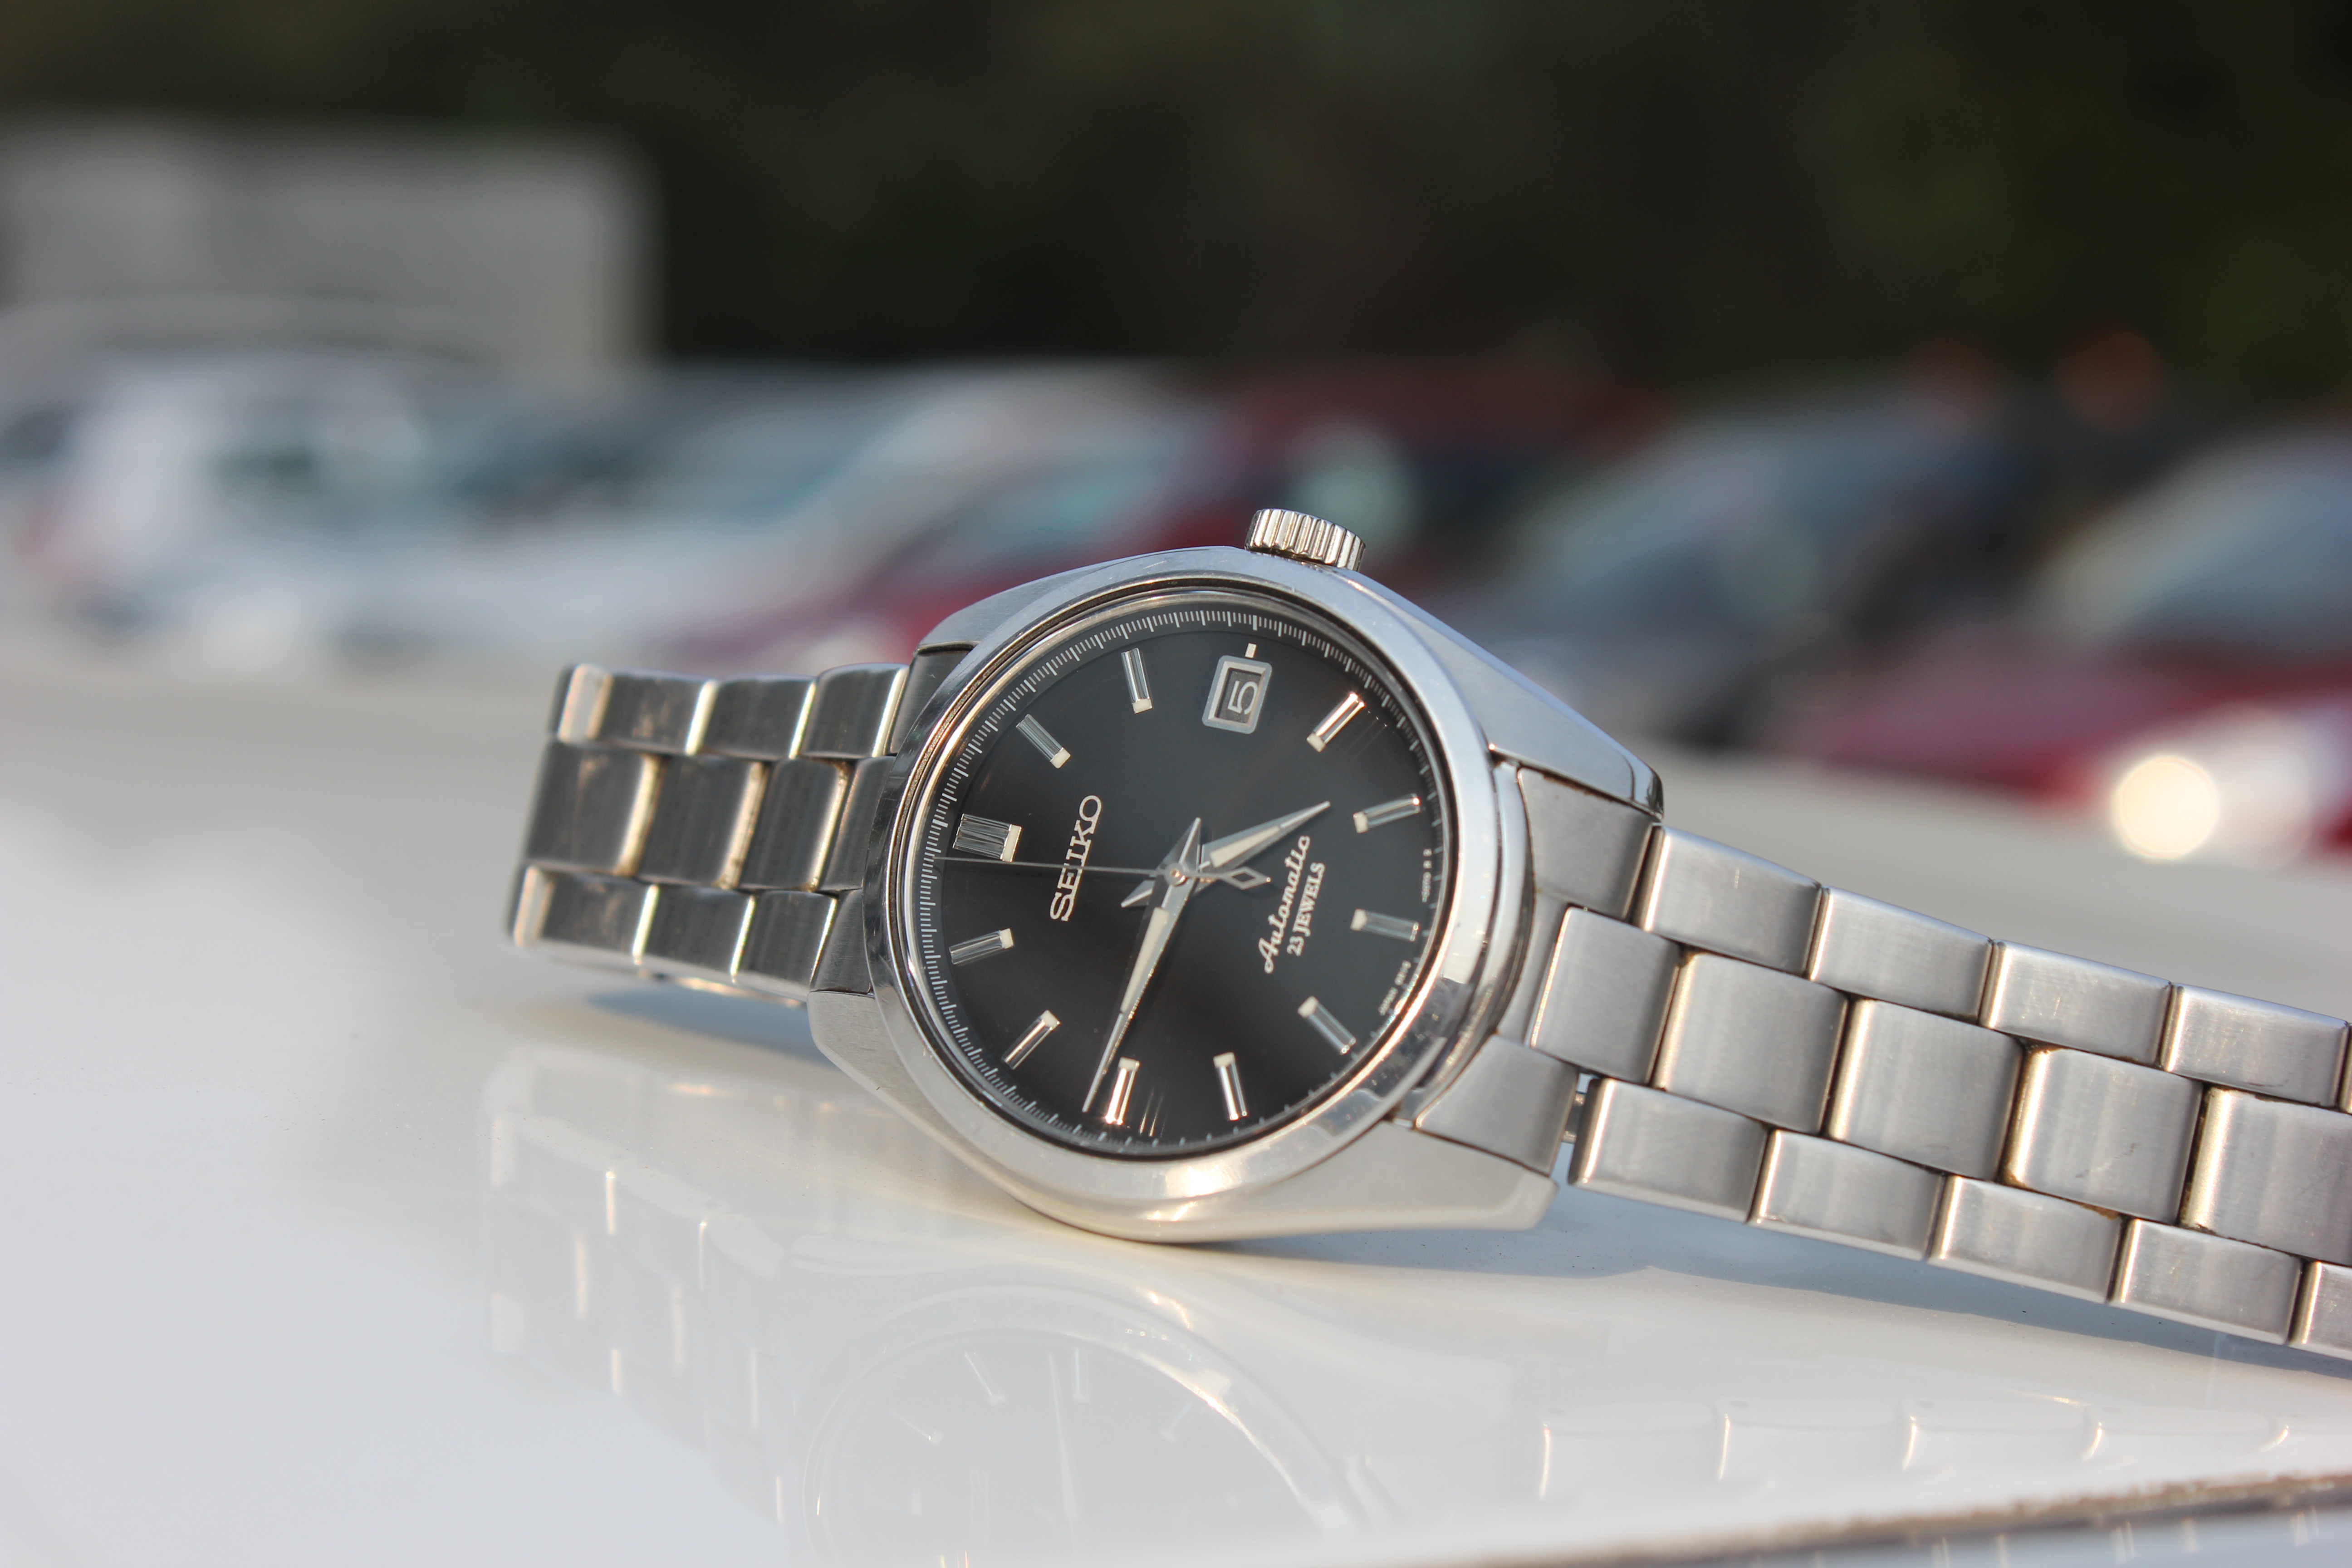 Seiko SARB033 Automatic Watch Review – WristReview.com – Featuring Watch  Reviews, Critiques, Reports & News